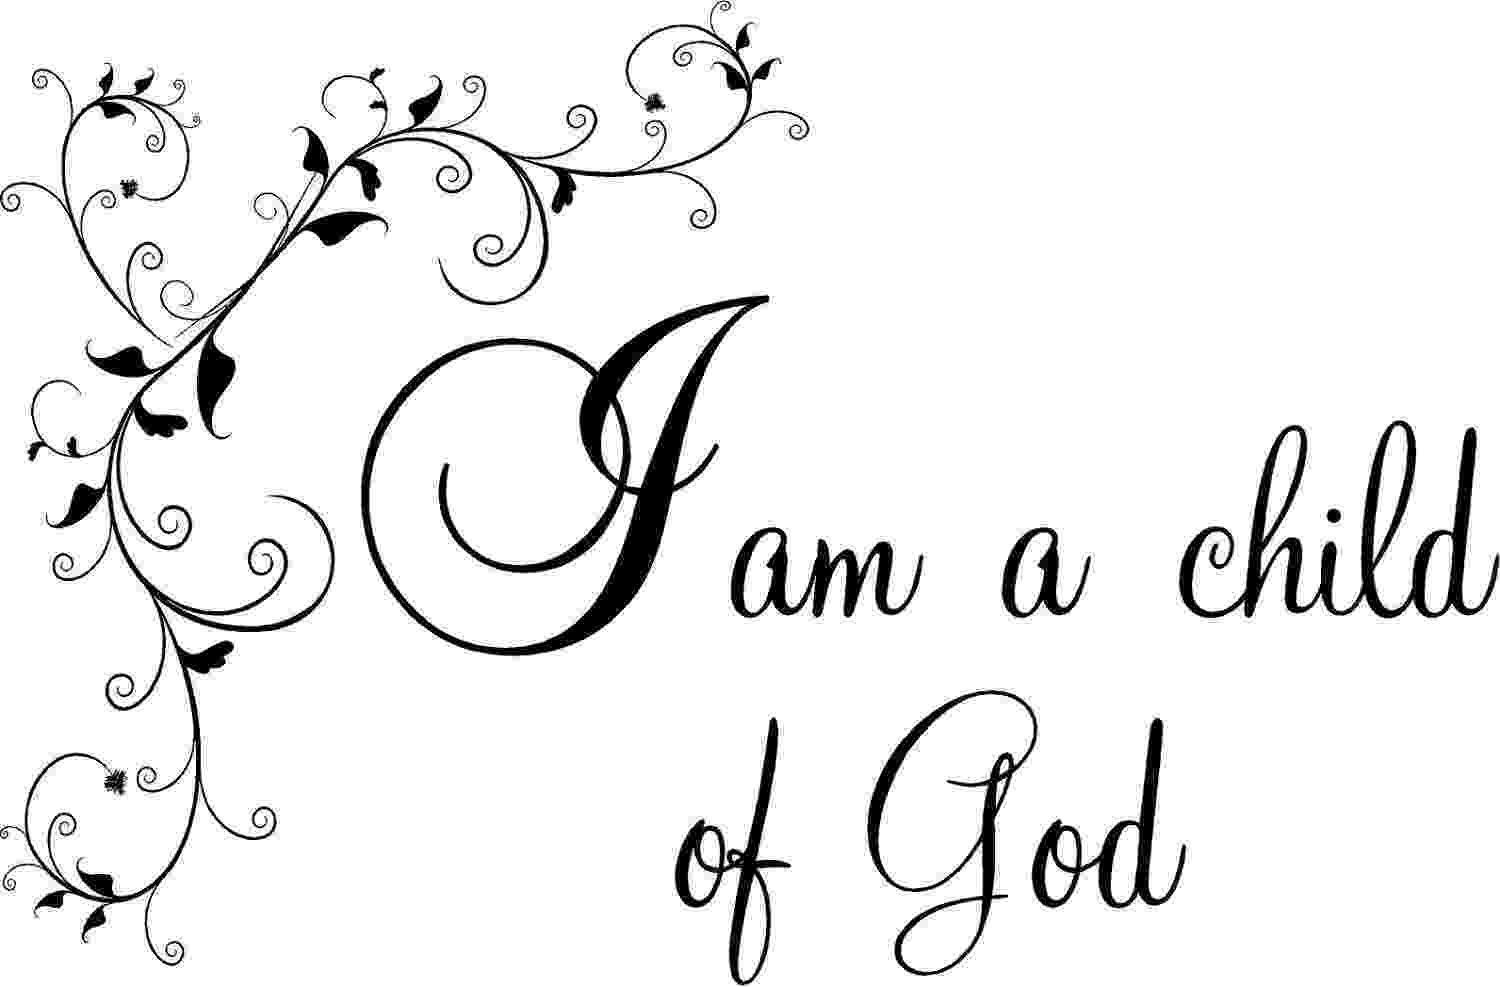 i am a child of god coloring page i am a child of god coloring page part 1 free resource child a god coloring page am of i 